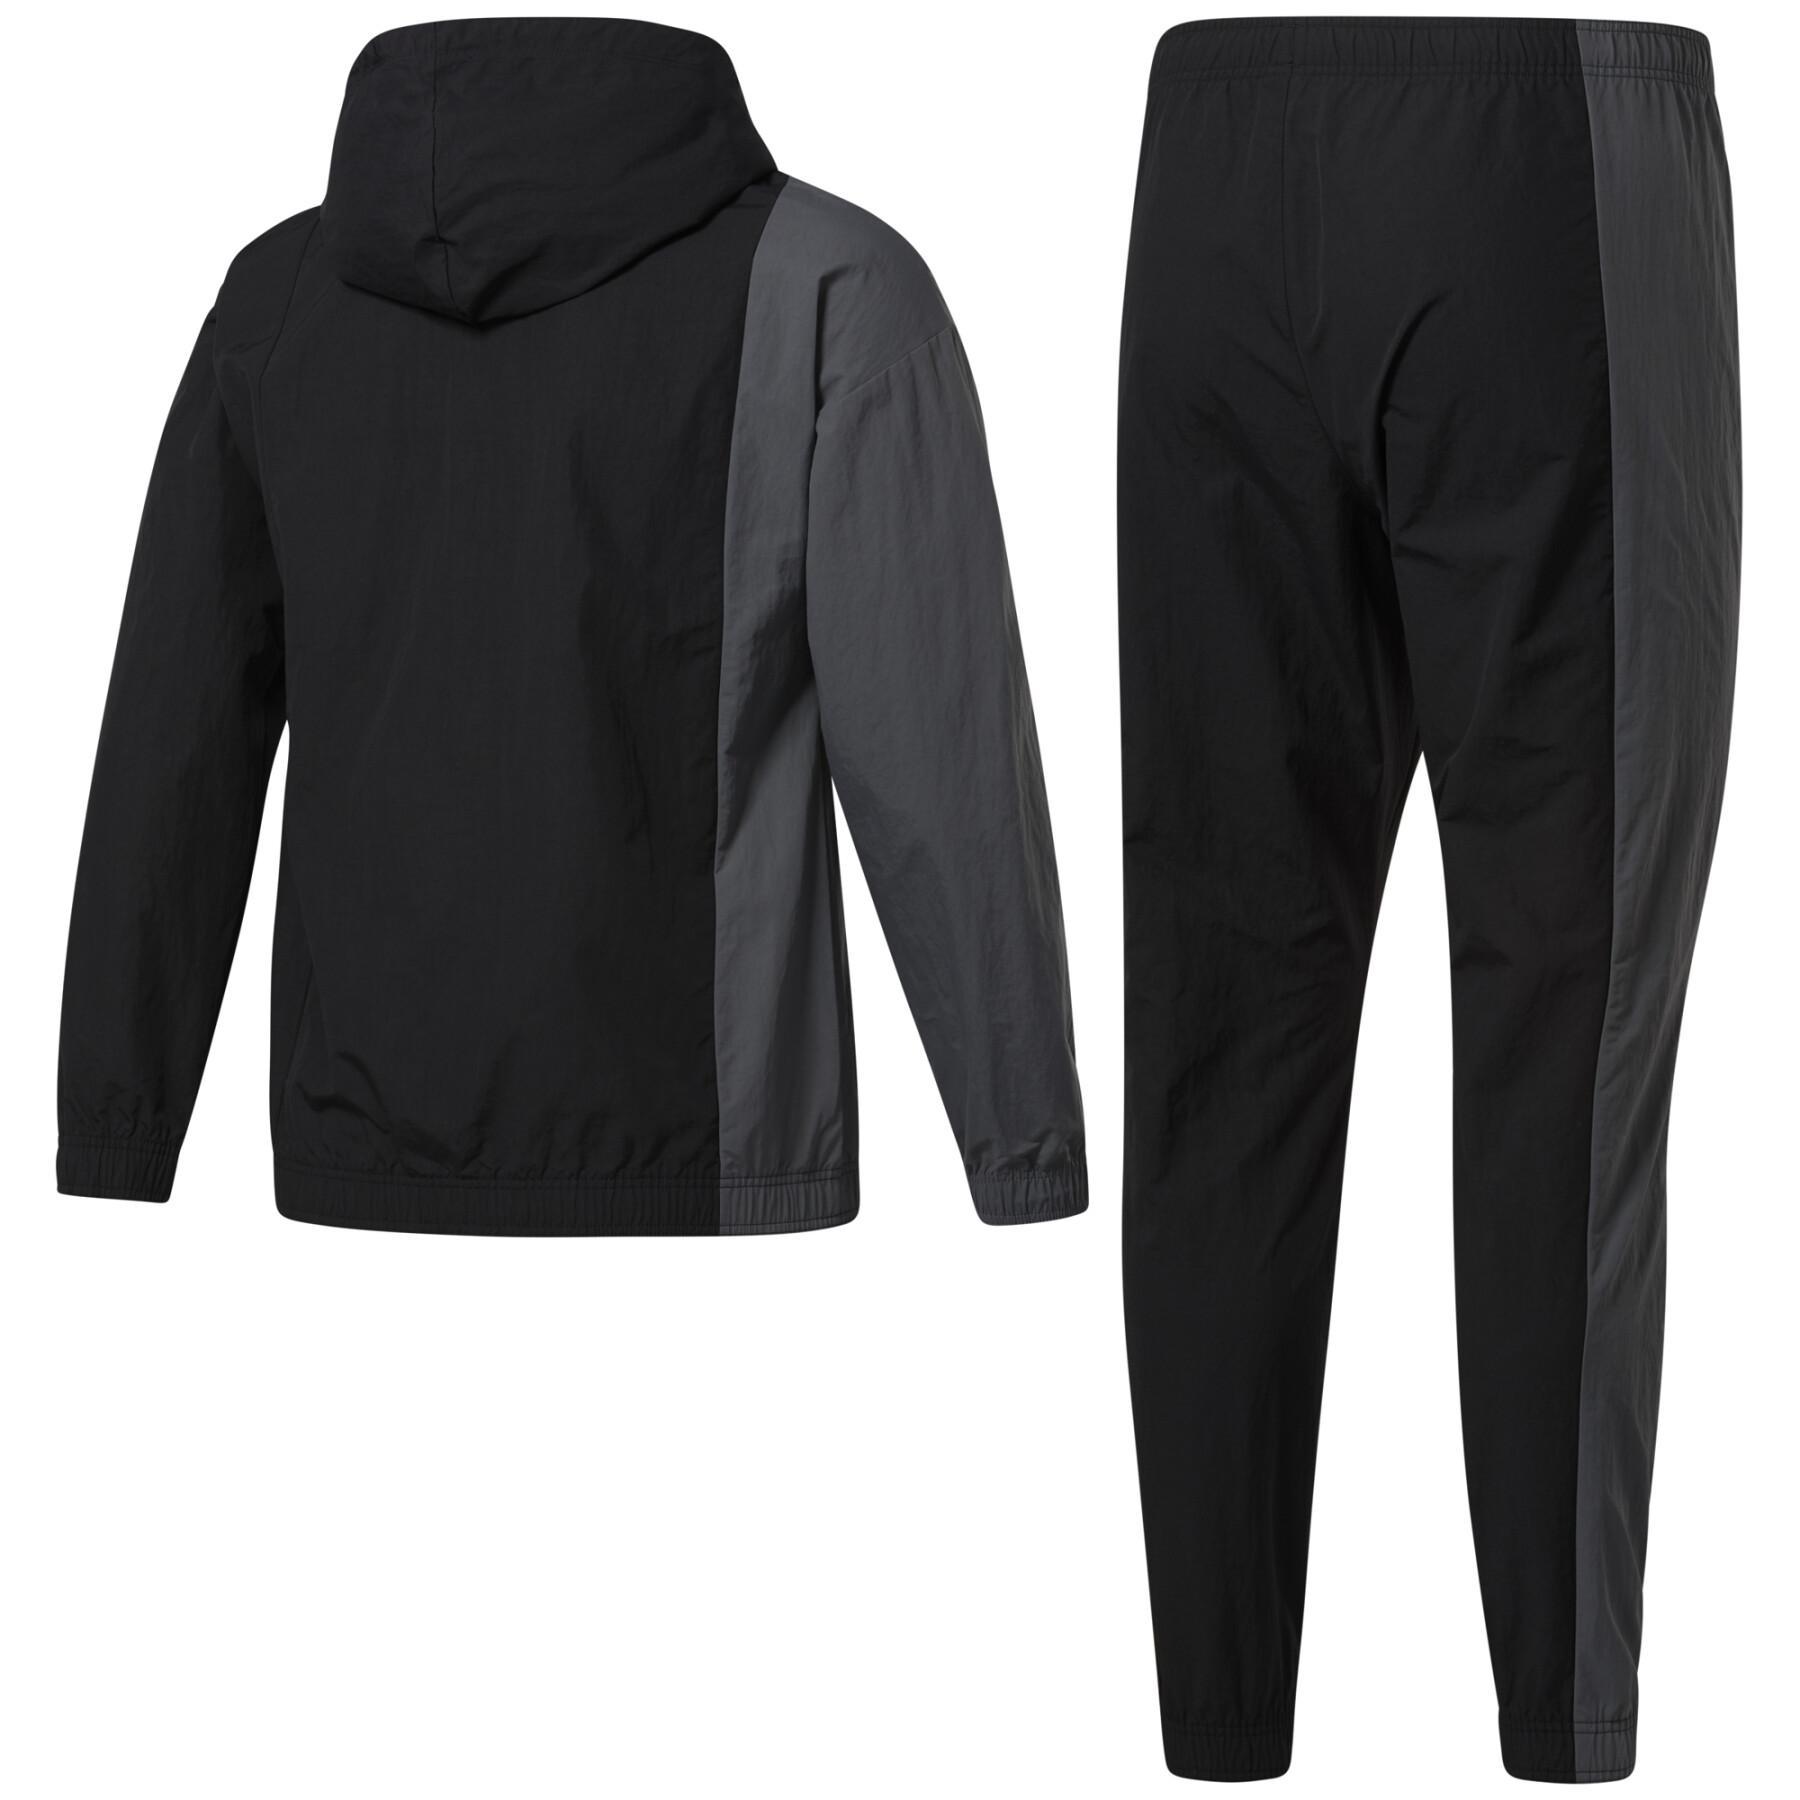 Tracksuit Reebok Techstyle - Jackets and tracksuits - Textile ...